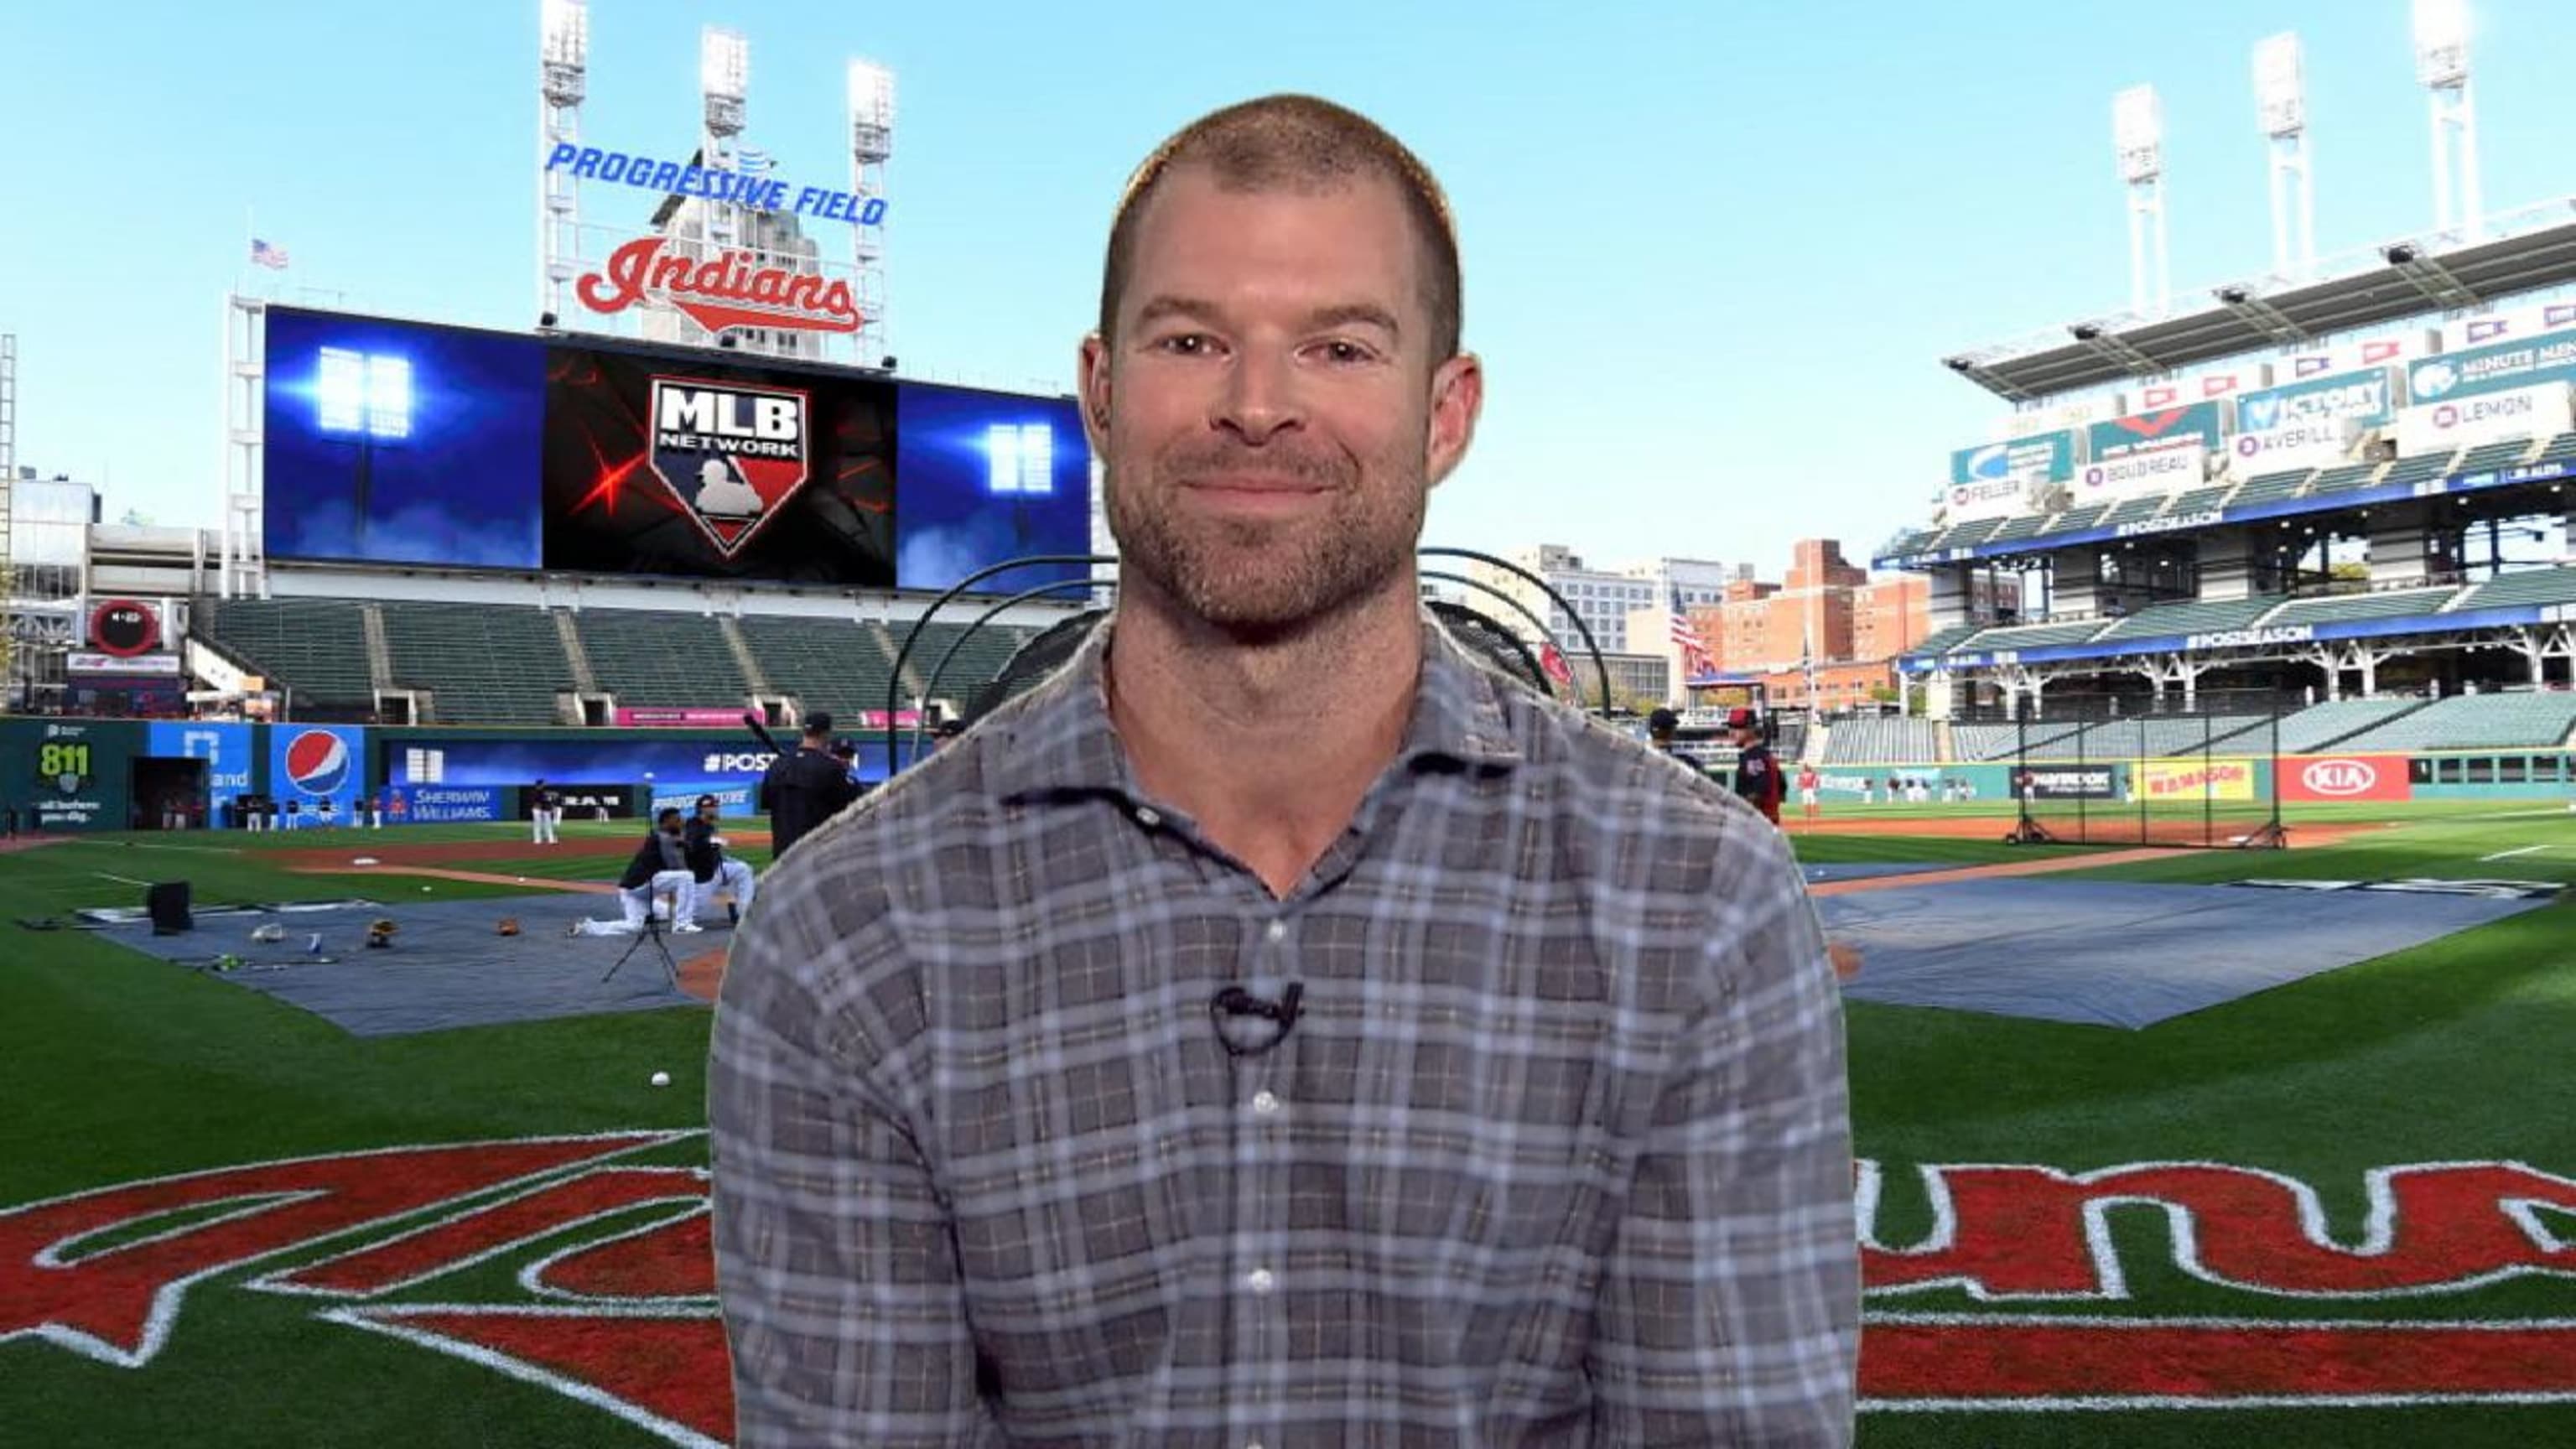 Indians star pitcher Corey Kluber has low salary for a Cy Young winner